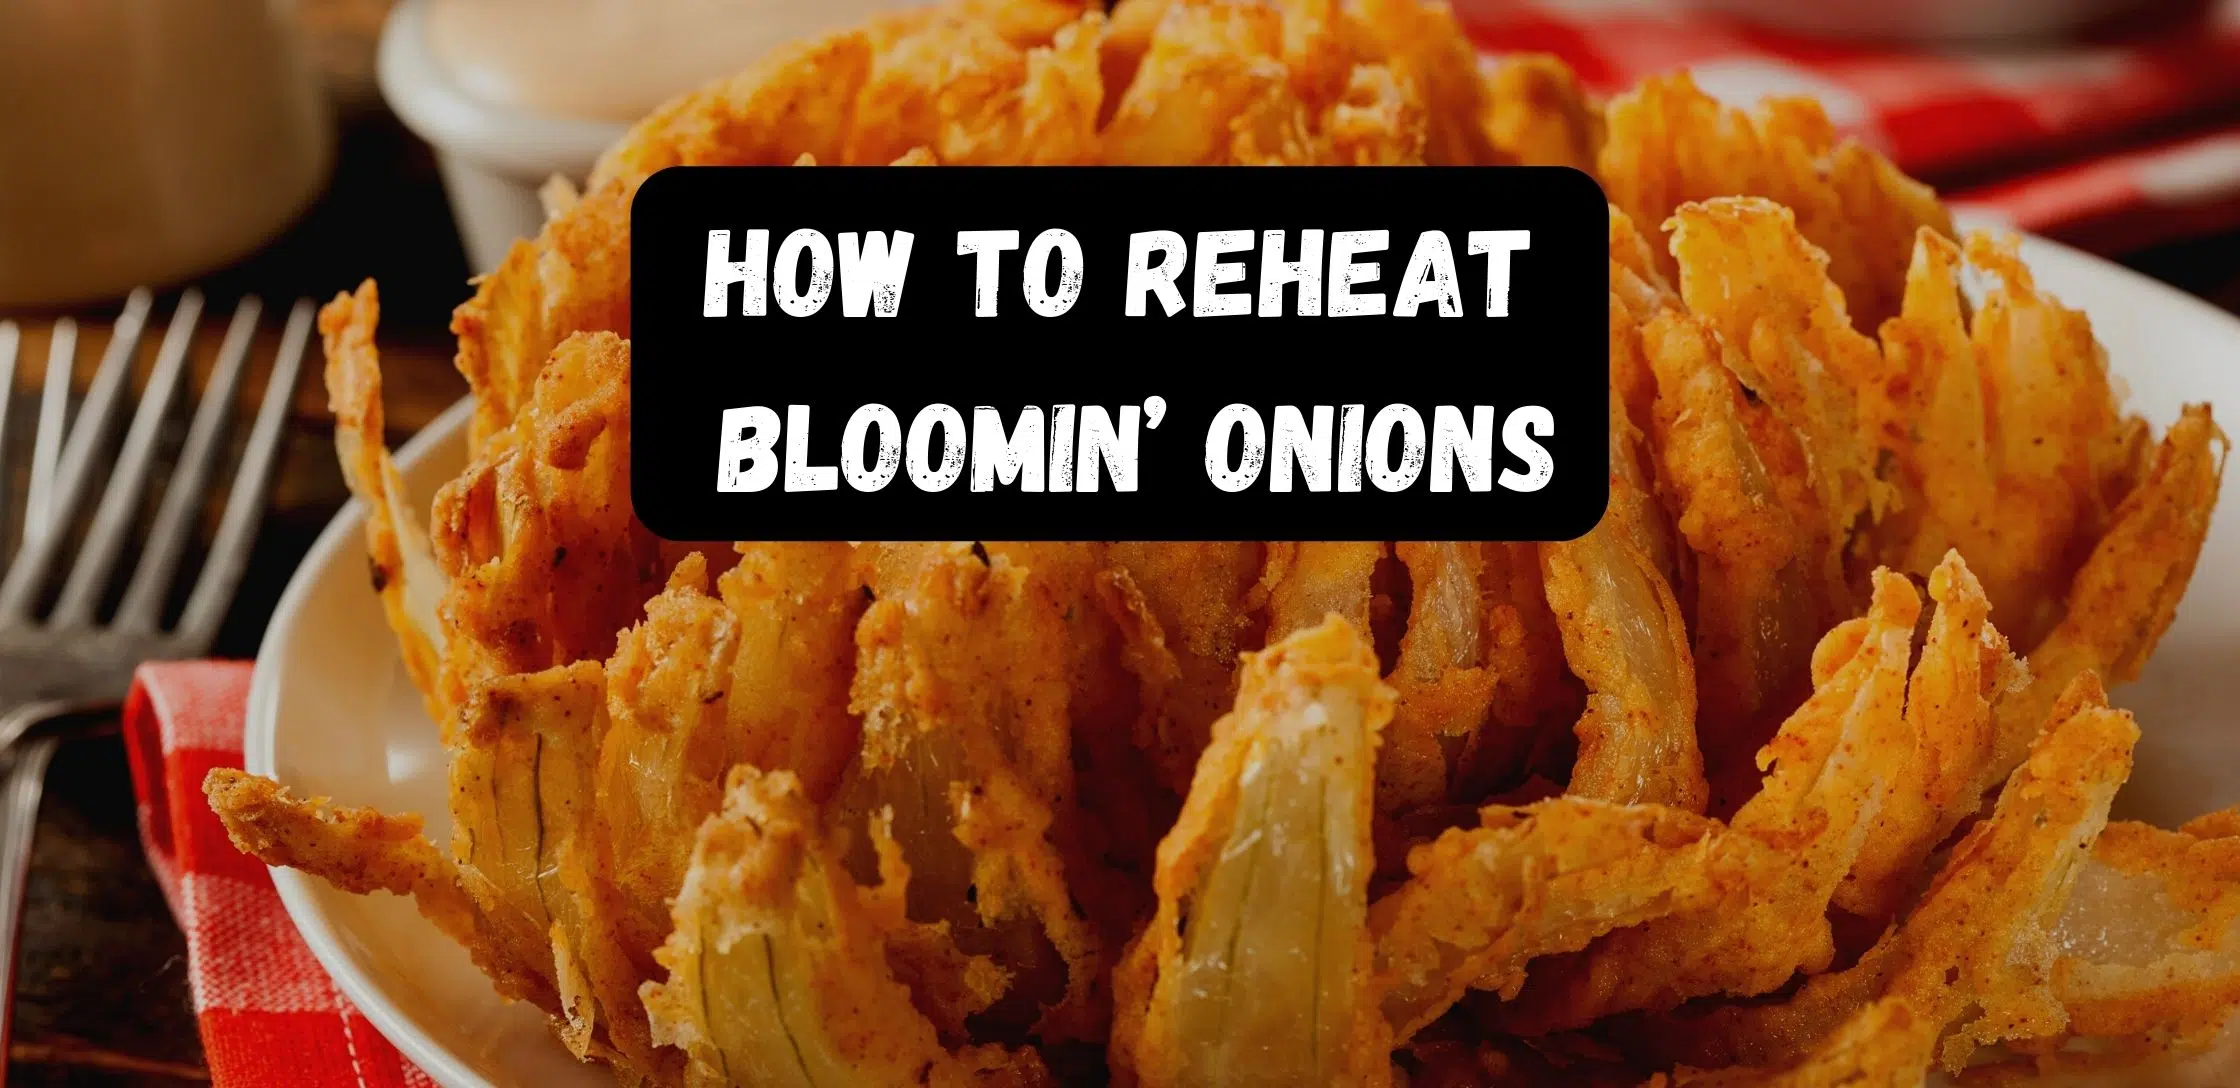 Crispy and Crunchy: How to Achieve the Perfectly Reheated Bloomin